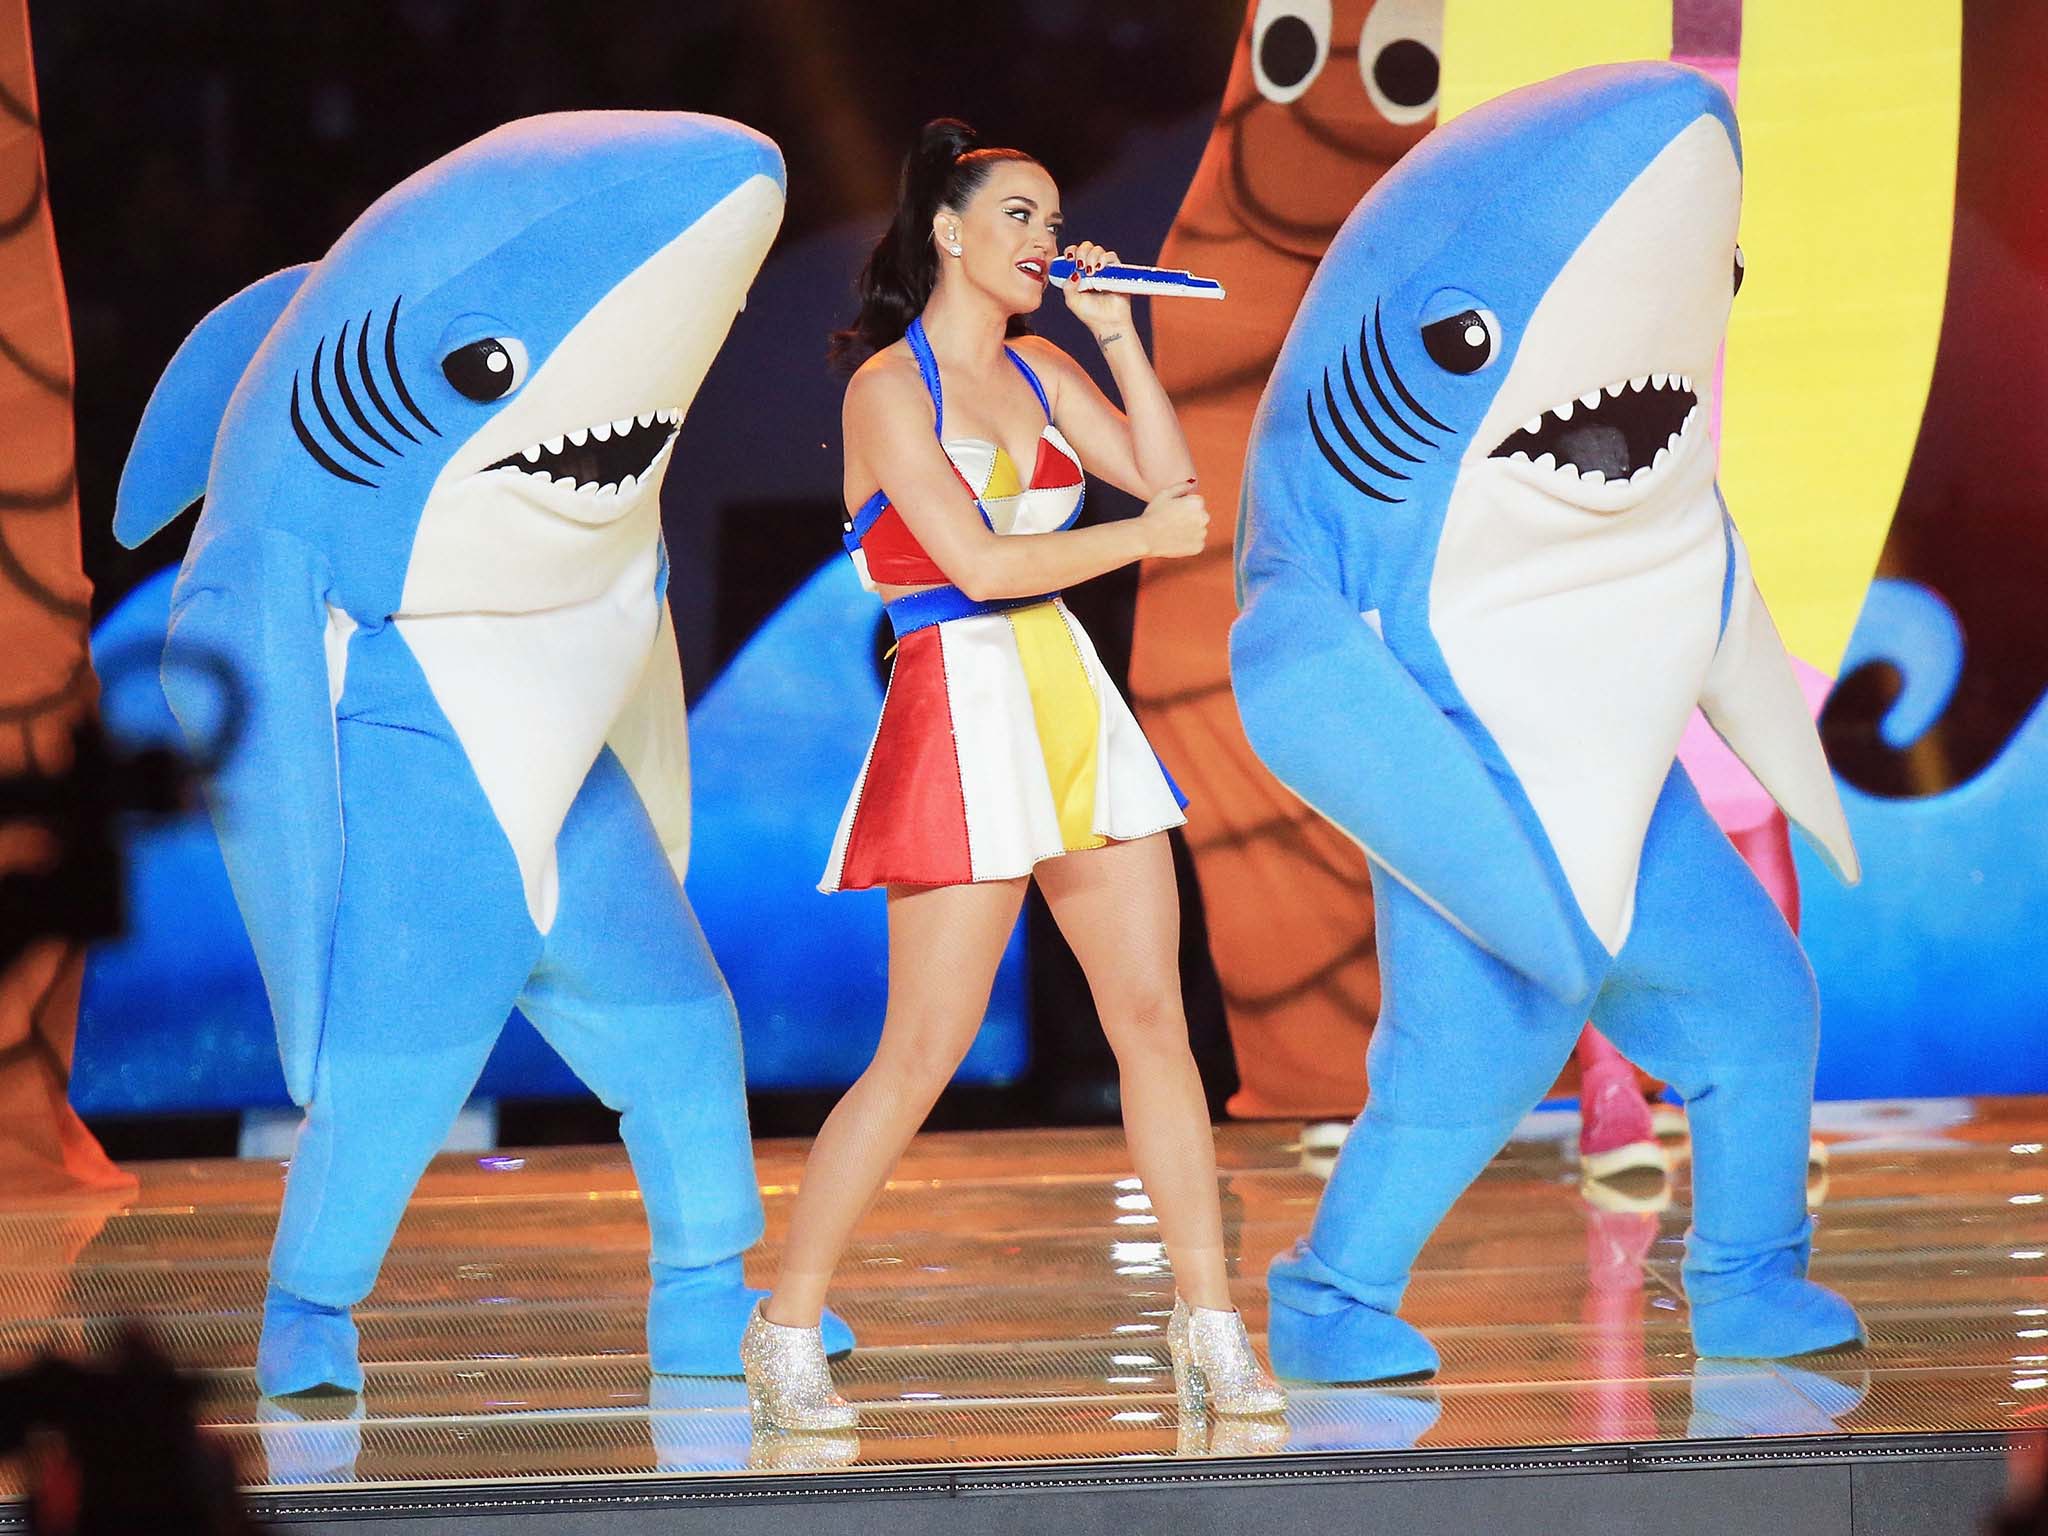 Kardashian game developers turn their sights on Katy Perry